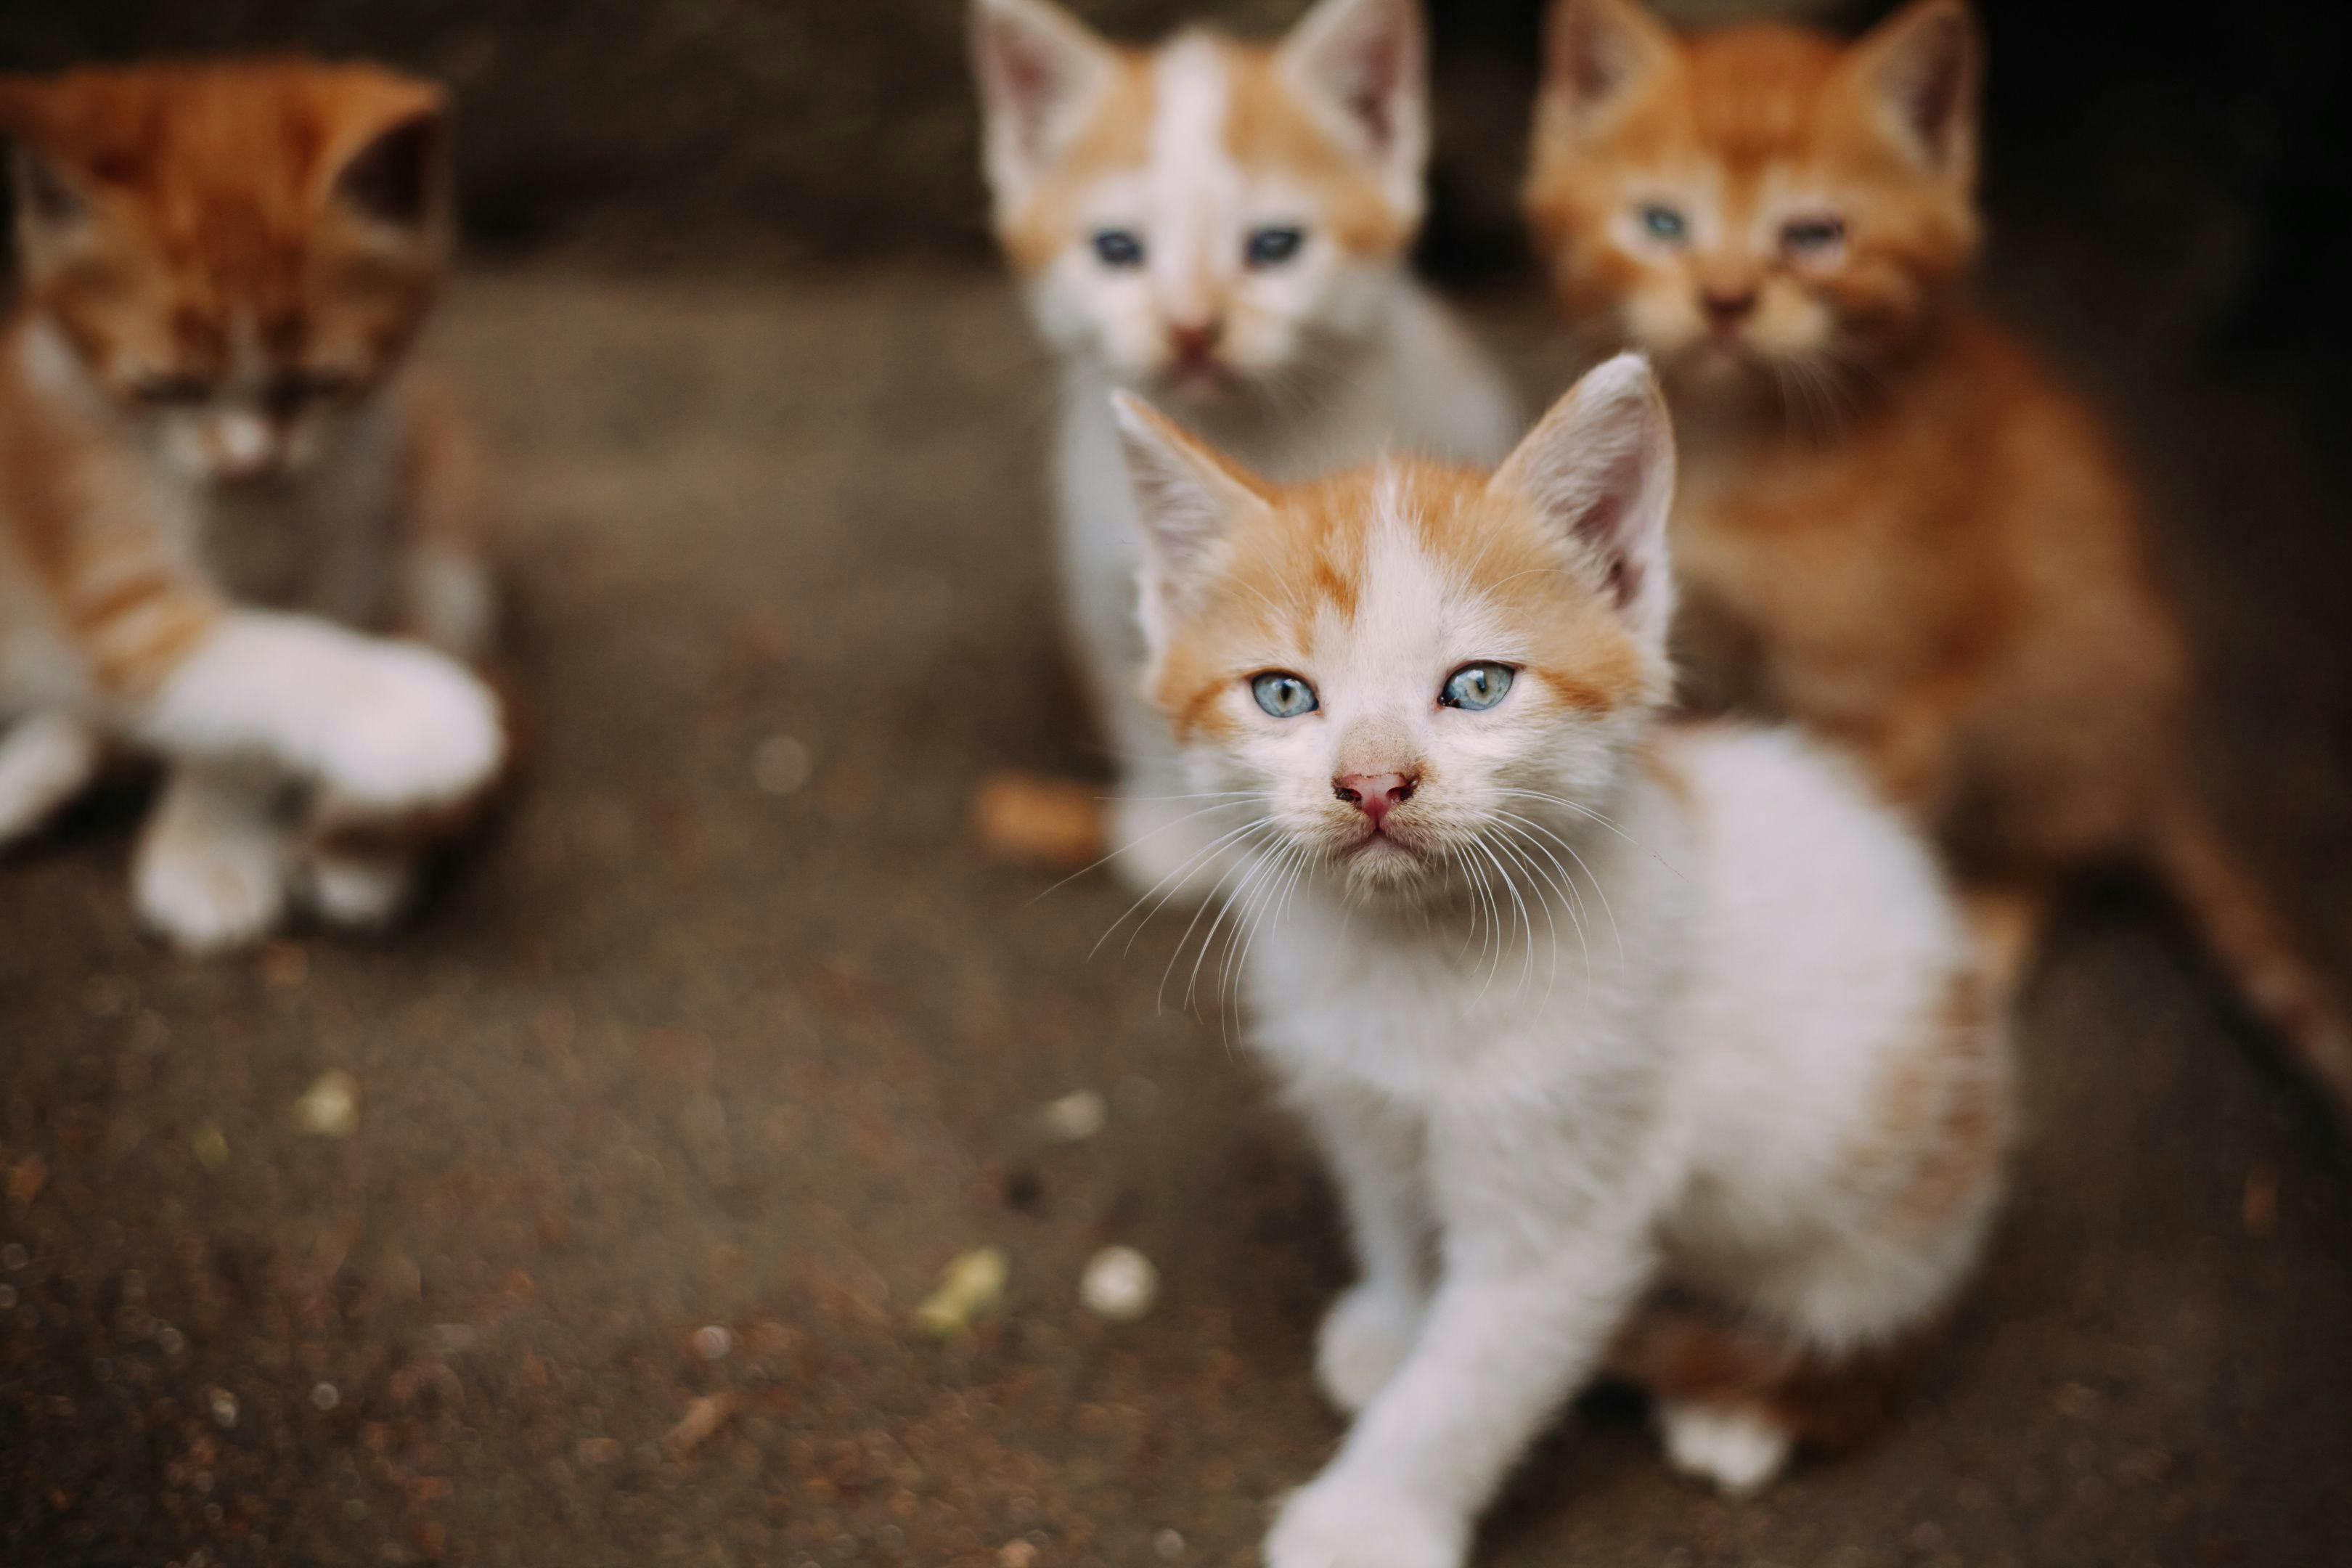 Alley Cat Allies provides humane assistance to address cat population in Cayman Islands